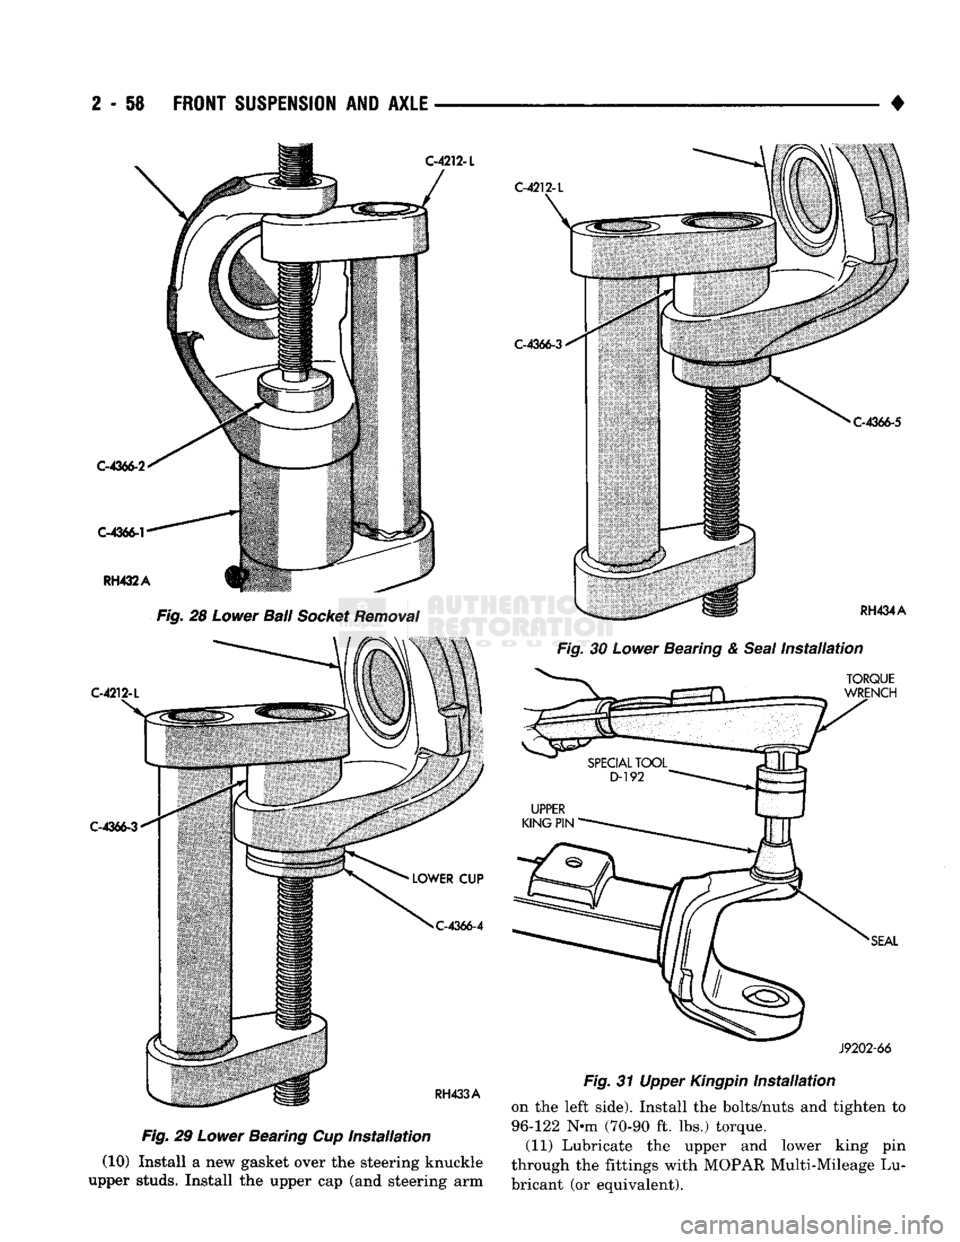 DODGE TRUCK 1993  Service Service Manual 
2
 - 58
 FRONT
 SUSPENSION
 AND
 AXLE 

• 

C-4366-2 
 C-4366-1 
 RH432A 
 C-4212-L 

Fig.
 28
 Lower
 Ball
 Socket
 Removal 

C-4212-L 

C-4366-3 
 C-4366-4 

RH433A 

Fig.
 29
 Lower
 Bearing Cup